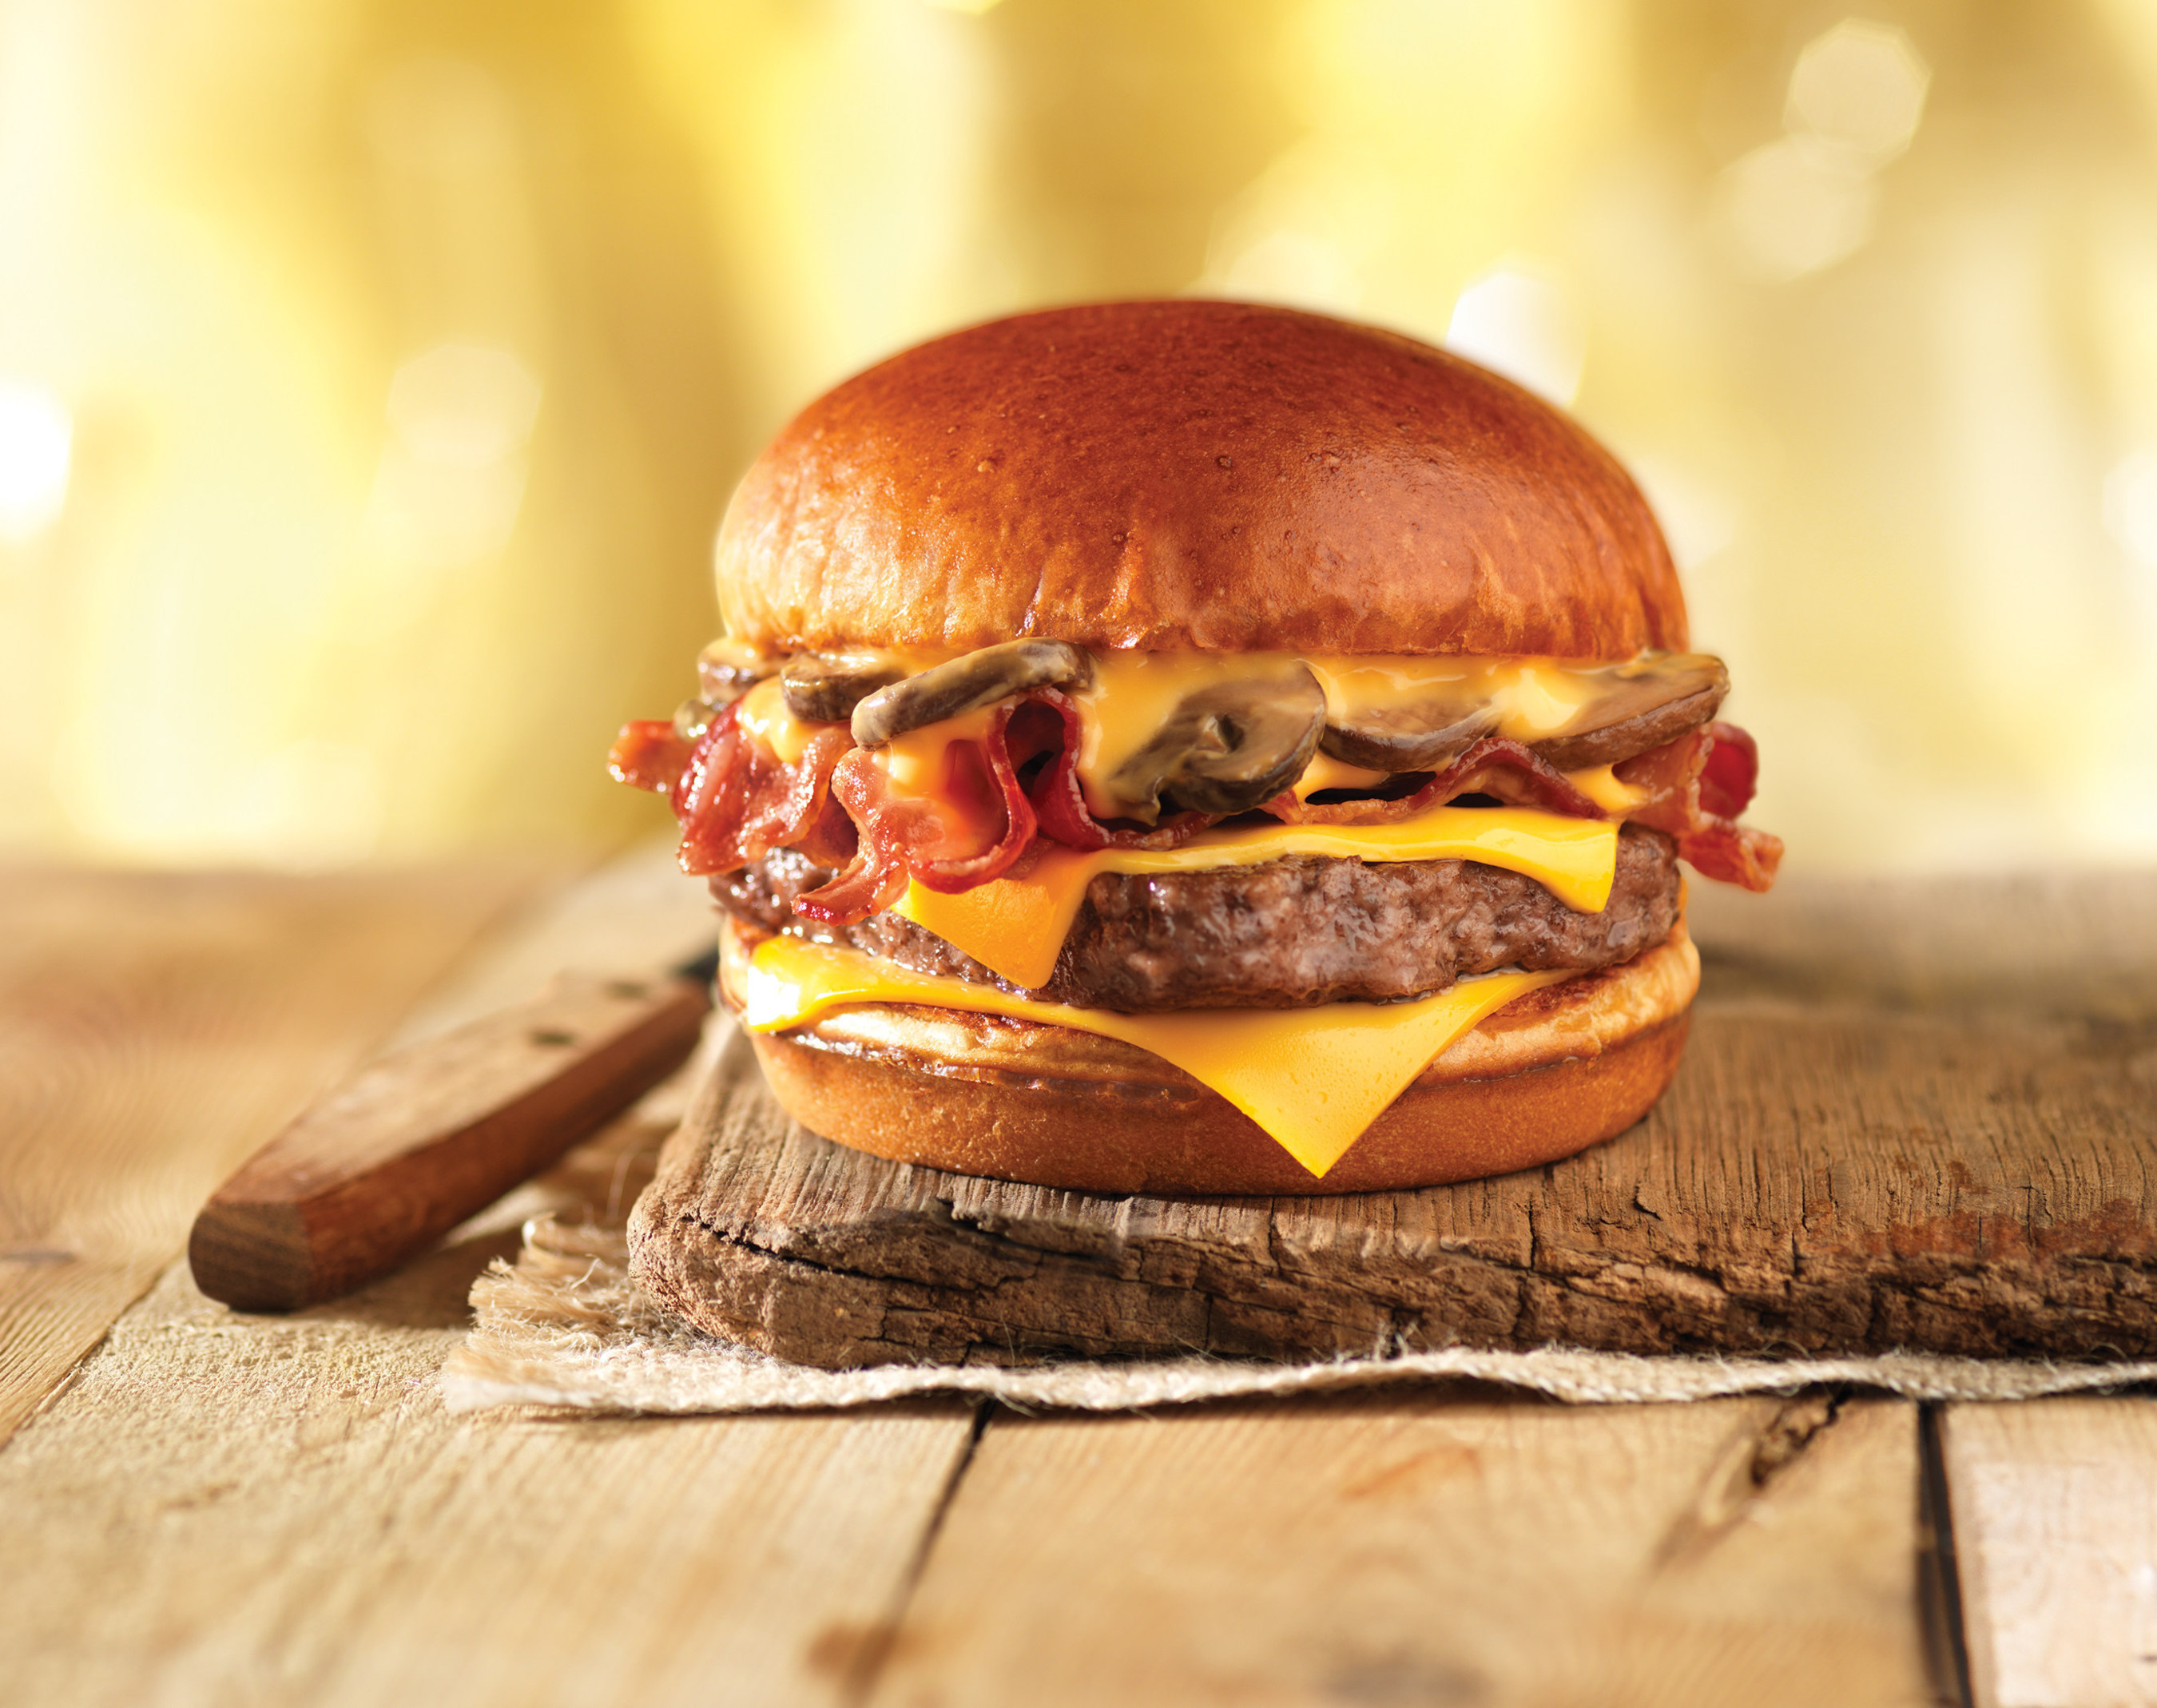 The return of Wendy's Bacon Portabella Melt on Brioche is giving a reason to treat yourself to a little indulgence. Available for a limited-time, each Wendy's Bacon Portabella Melt on Brioche features a hot quarter-pound of fresh, never-frozen North American beef hamburger patty, savory sauted portabella mushrooms, a slice of American cheese and crisp, thick-cut Applewood Smoked Bacon, all drenched in a rich, warm cheddar cheese sauce and served on a toasted brioche bun.